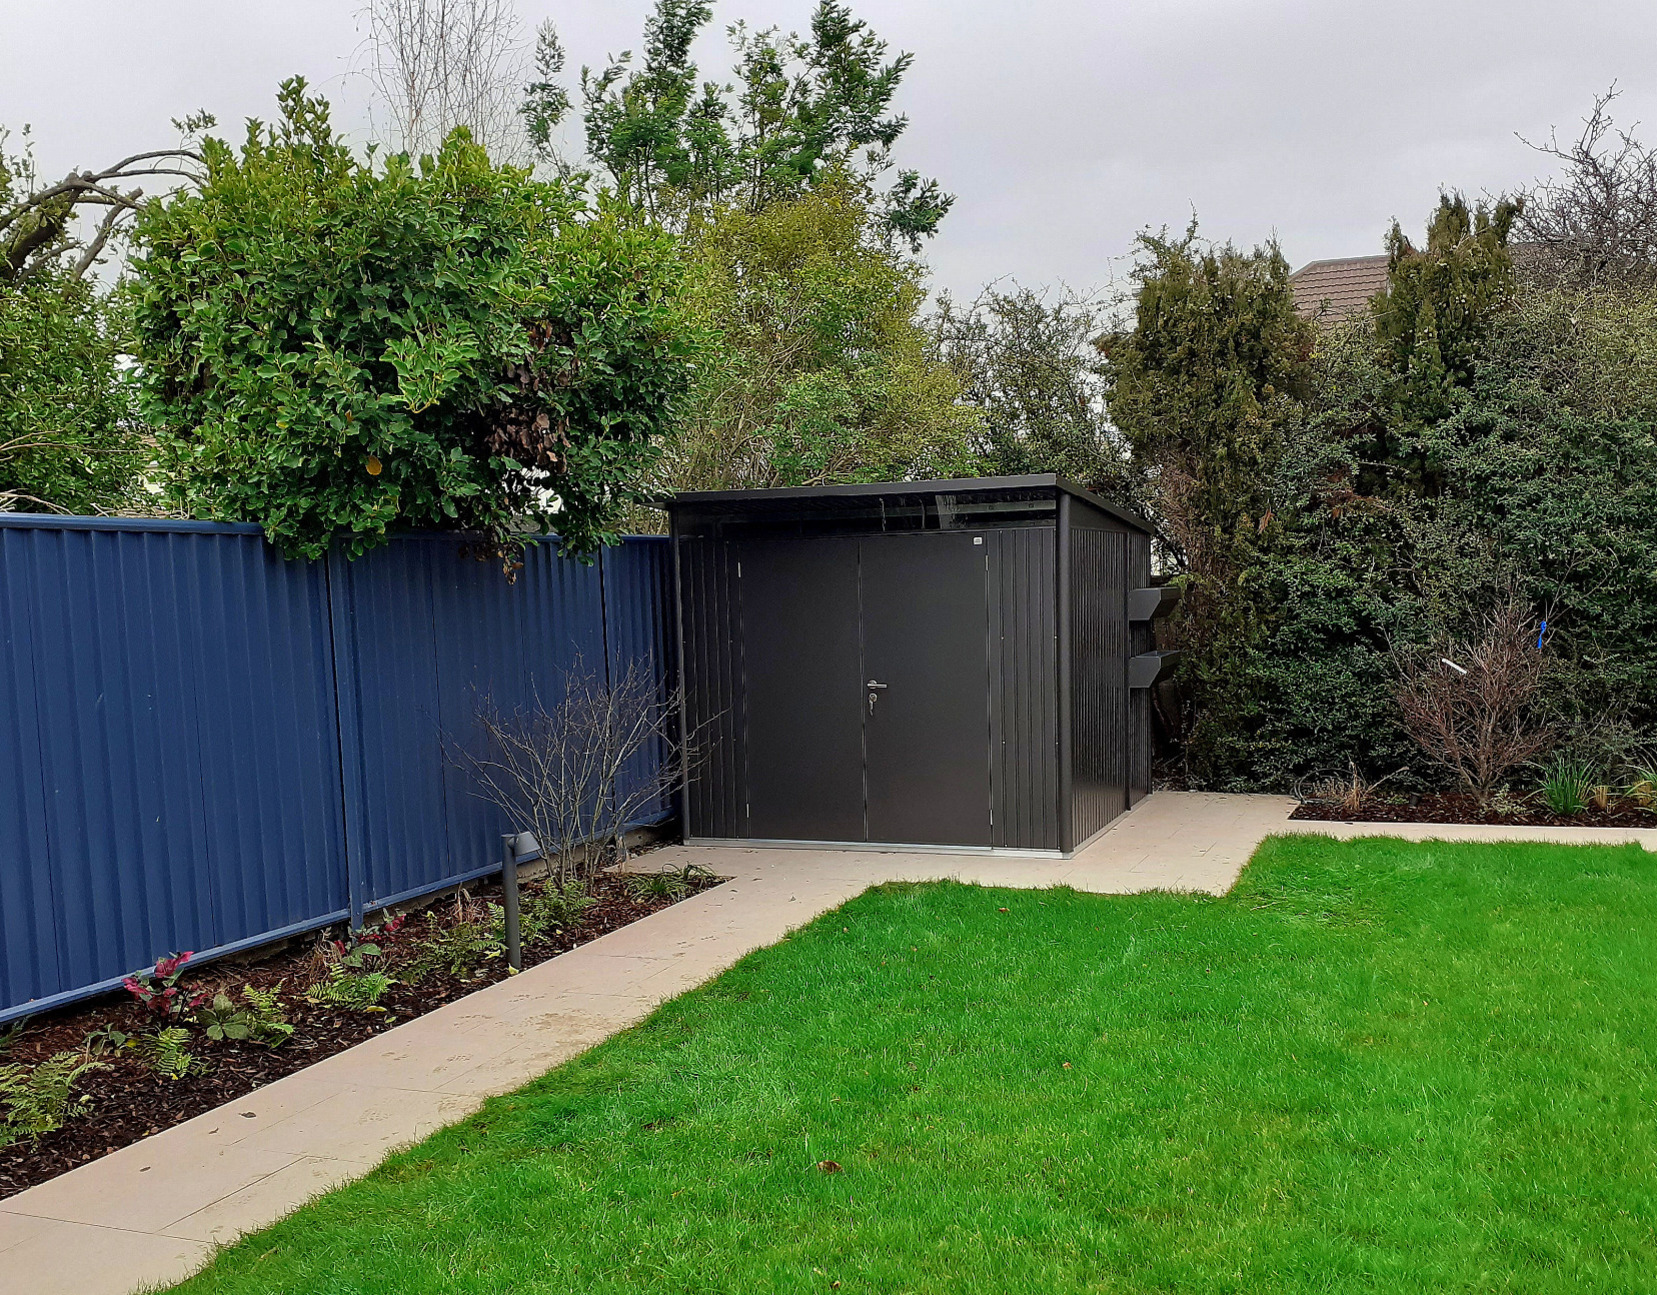 Biohort AvantGarde A7 Garden Shed in metallic dark grey with double doors, supplied & fitted in Blackrock, Co Dublin  | Owen Chubb Ireland's Leading supplier of Biohort Garden Sheds & Storage Solutions | Supplied + Fitted Nationwide